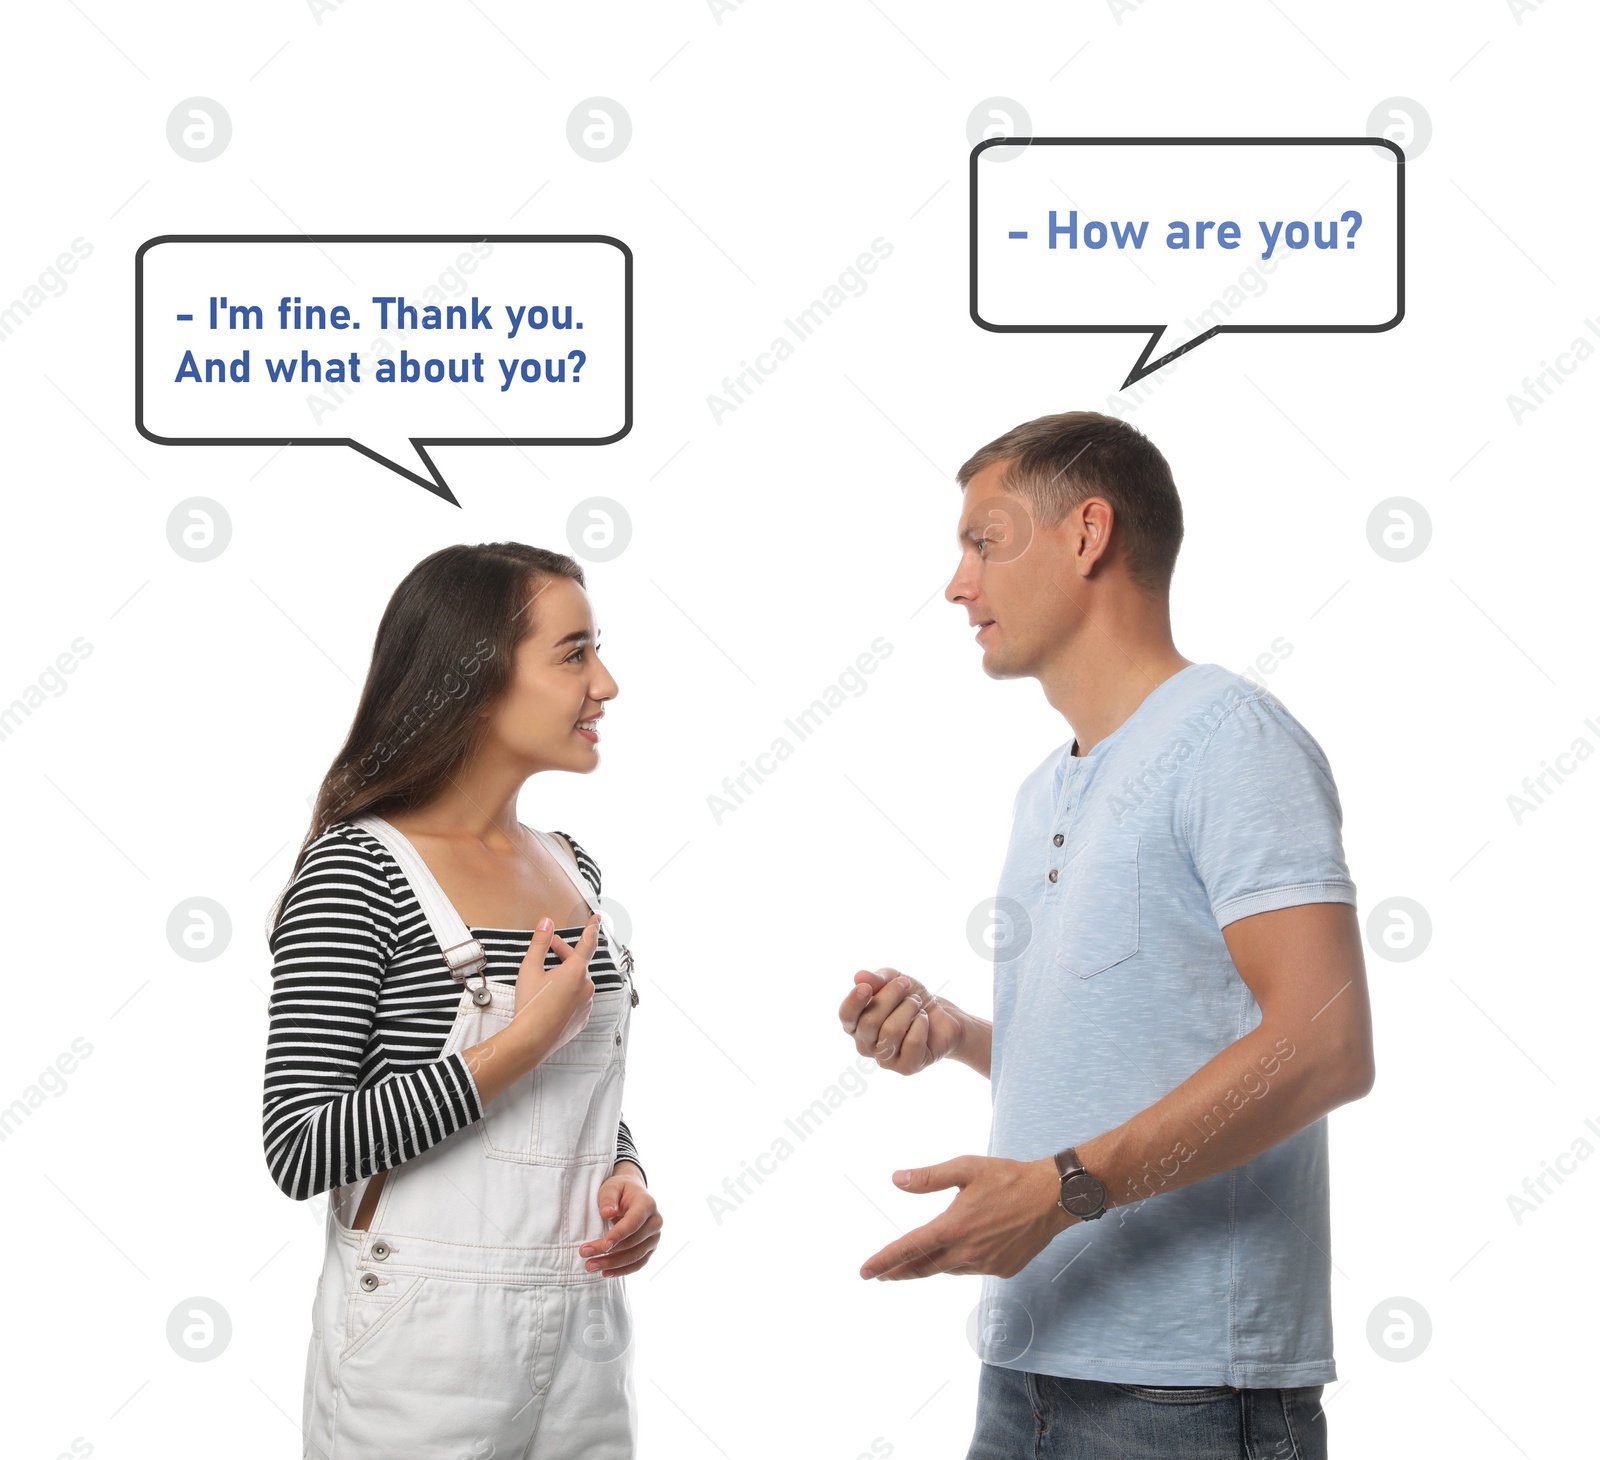 Image of Man and woman talking on white background. Dialogue balloons with phrases in English over them